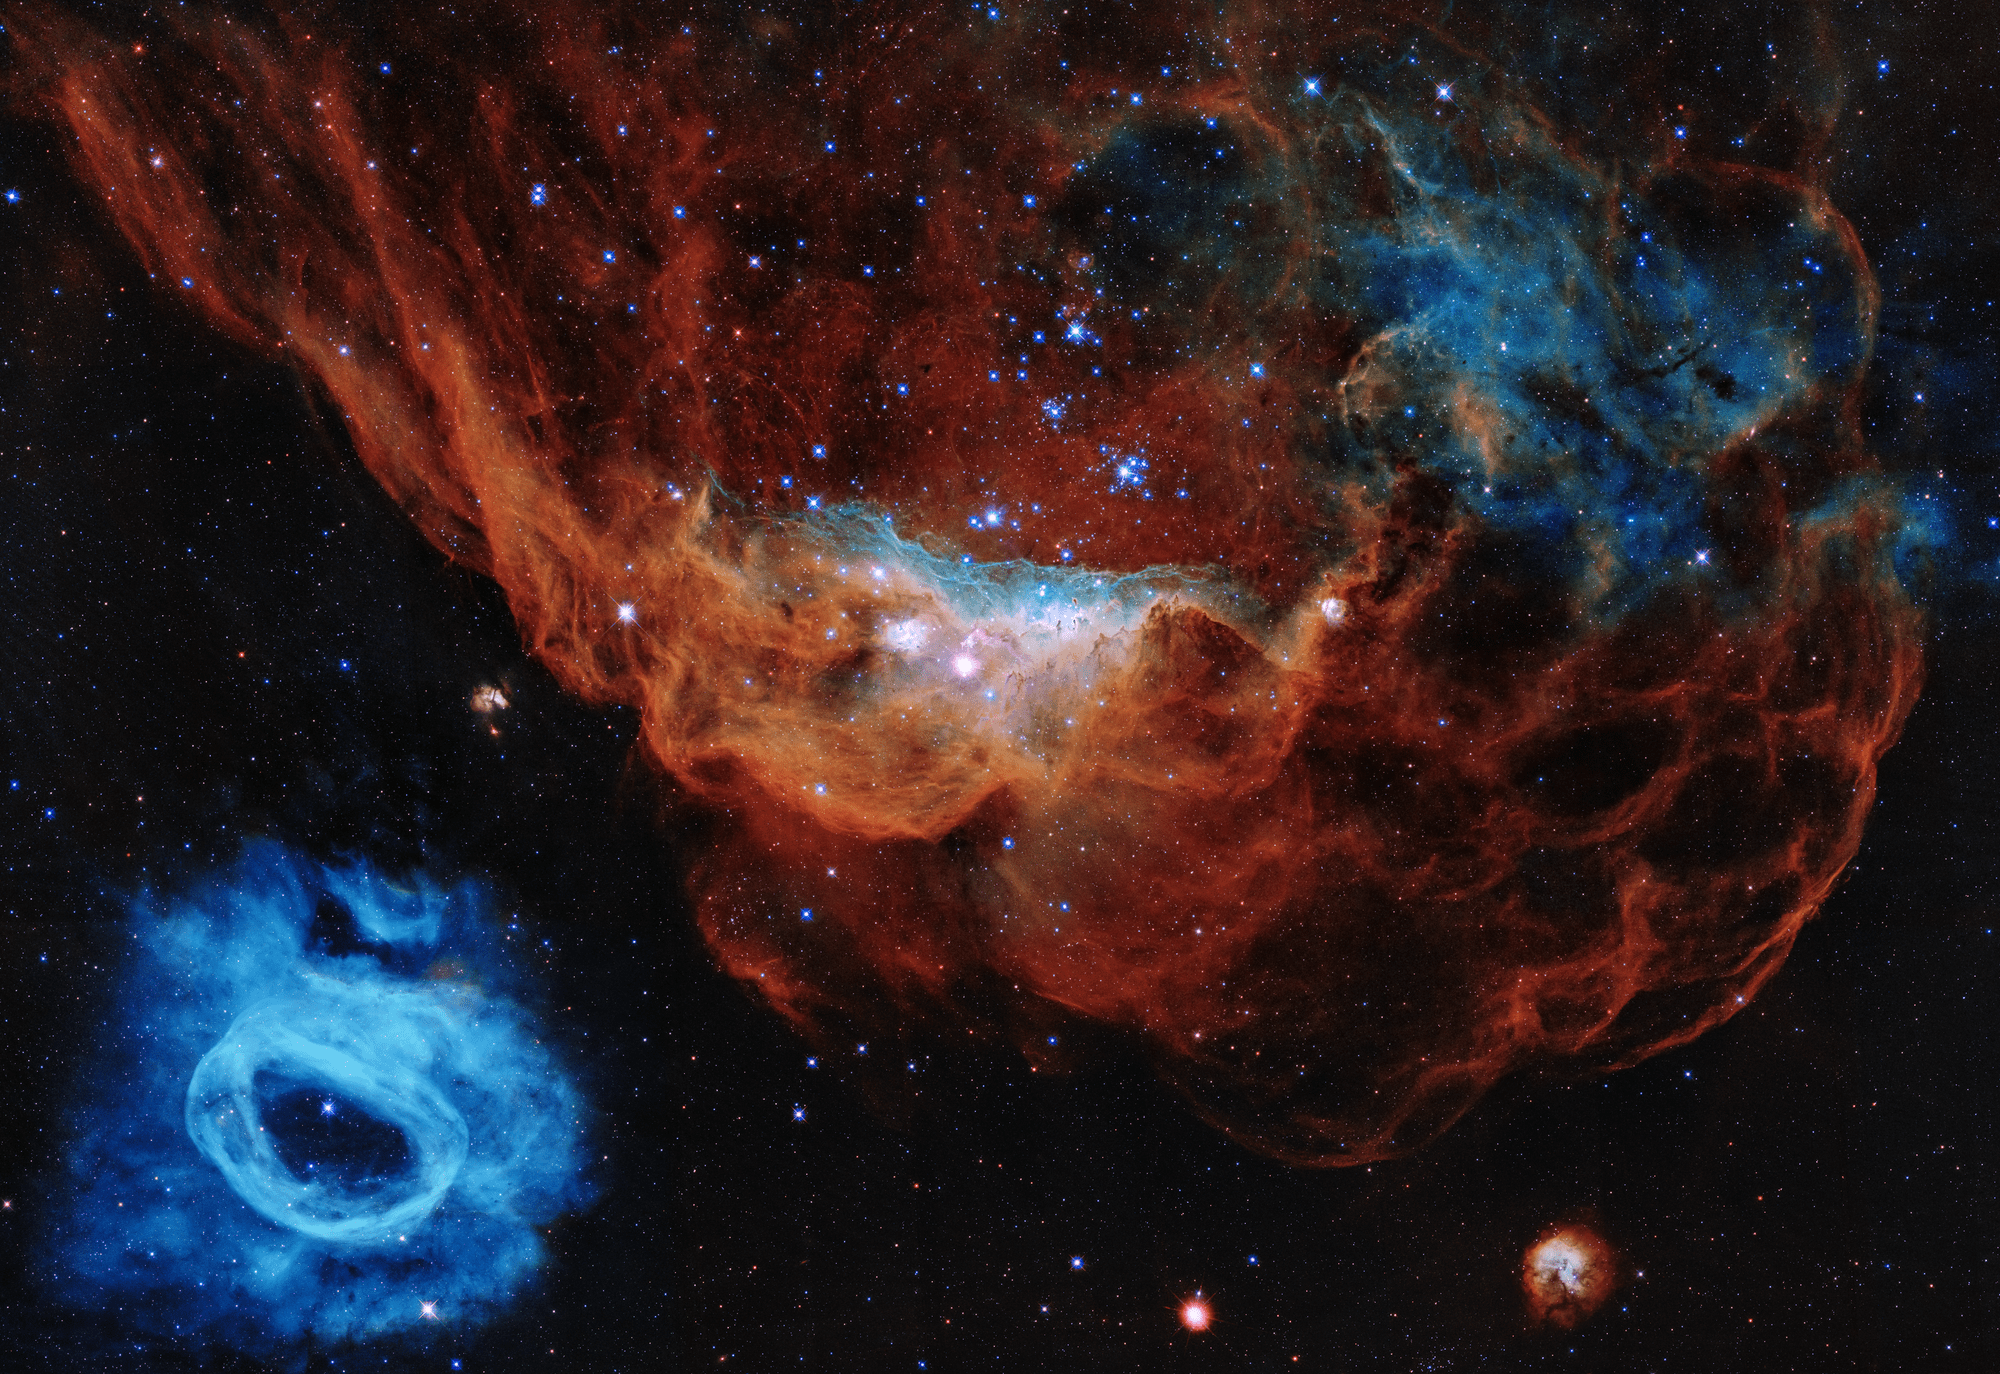 The giant red nebula (NGC 2014) and its smaller blue neighbour (NGC 2020). (Image: NASA, ESA and STScI)